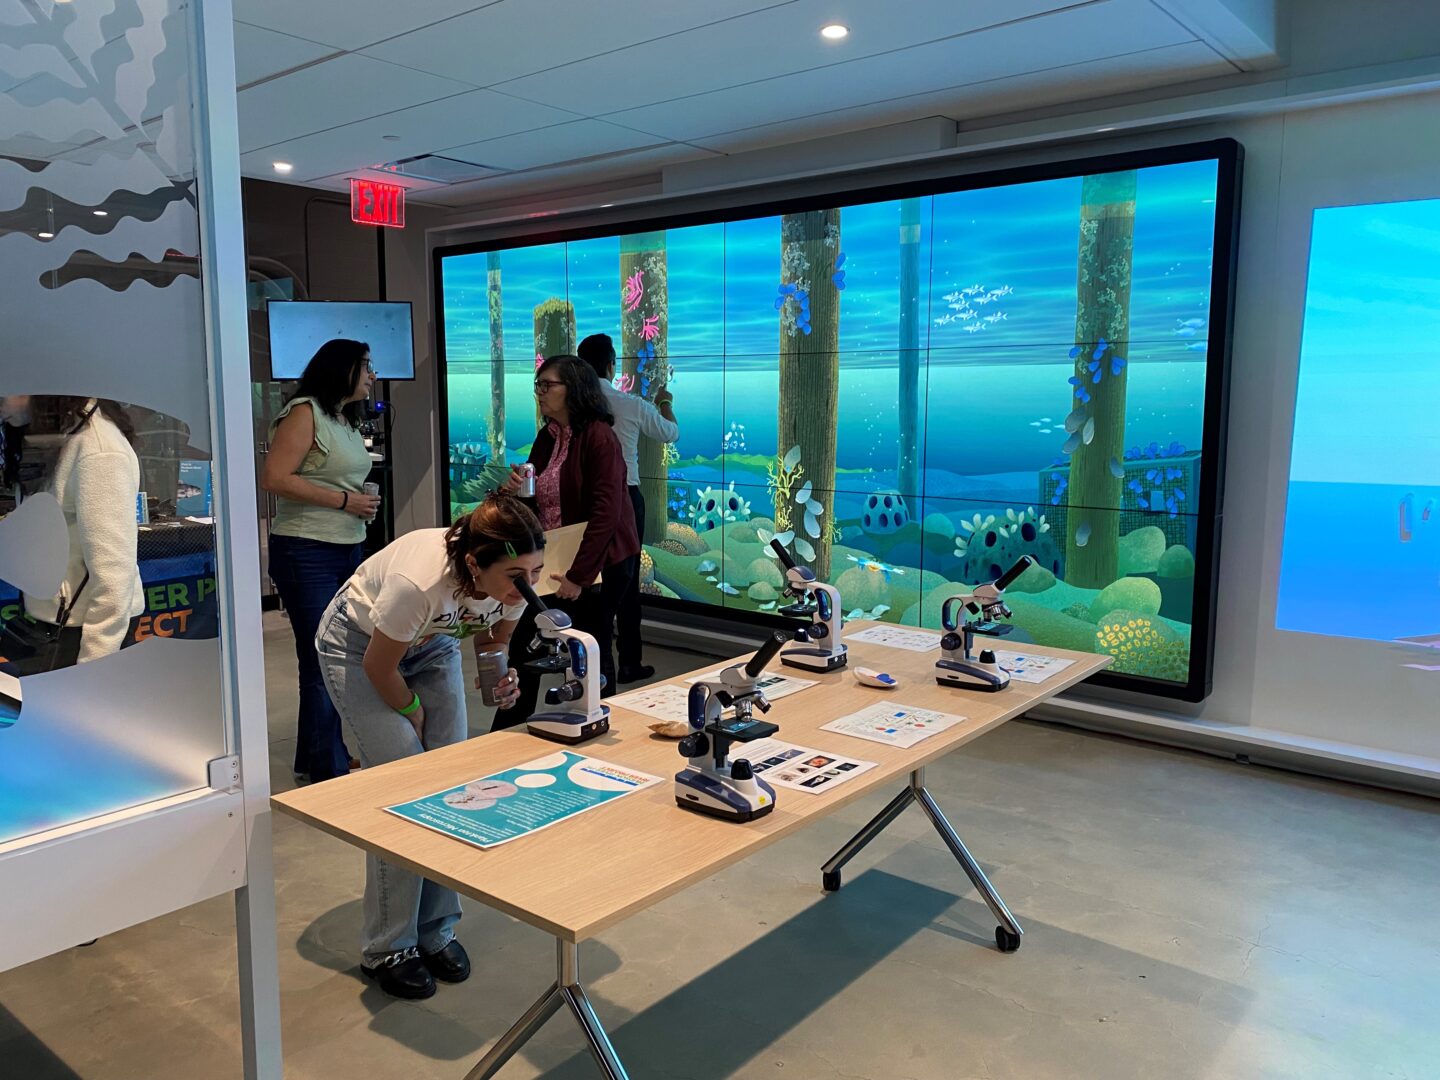 Visitors to the Pier 57 Discovery Tank interact with microscopes and touchscreen displays